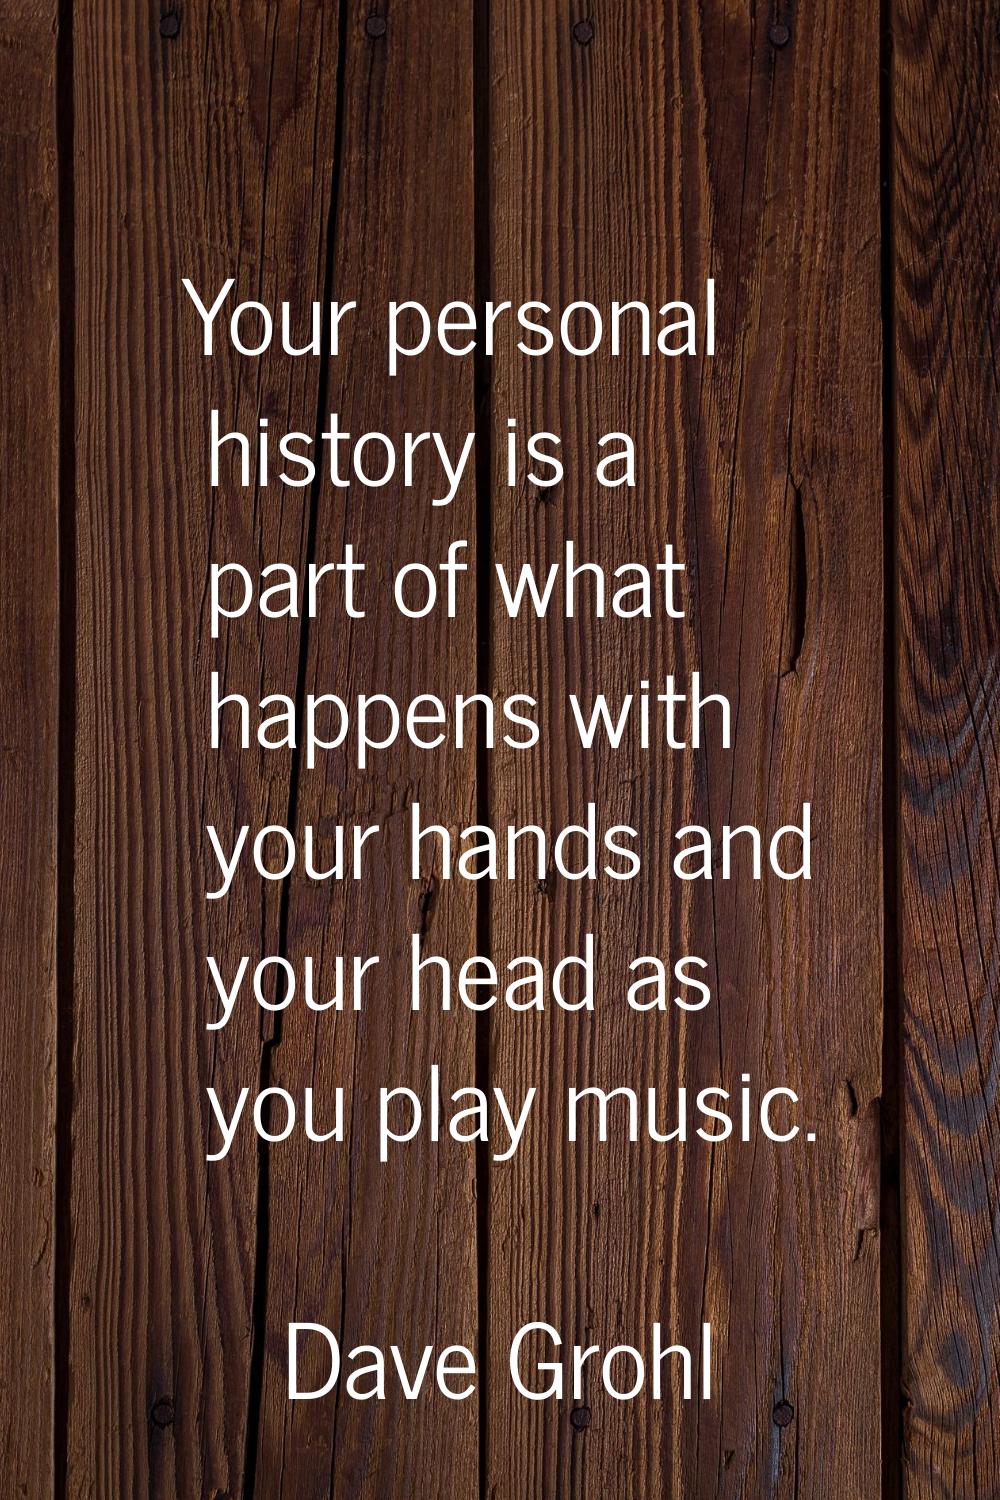 Your personal history is a part of what happens with your hands and your head as you play music.